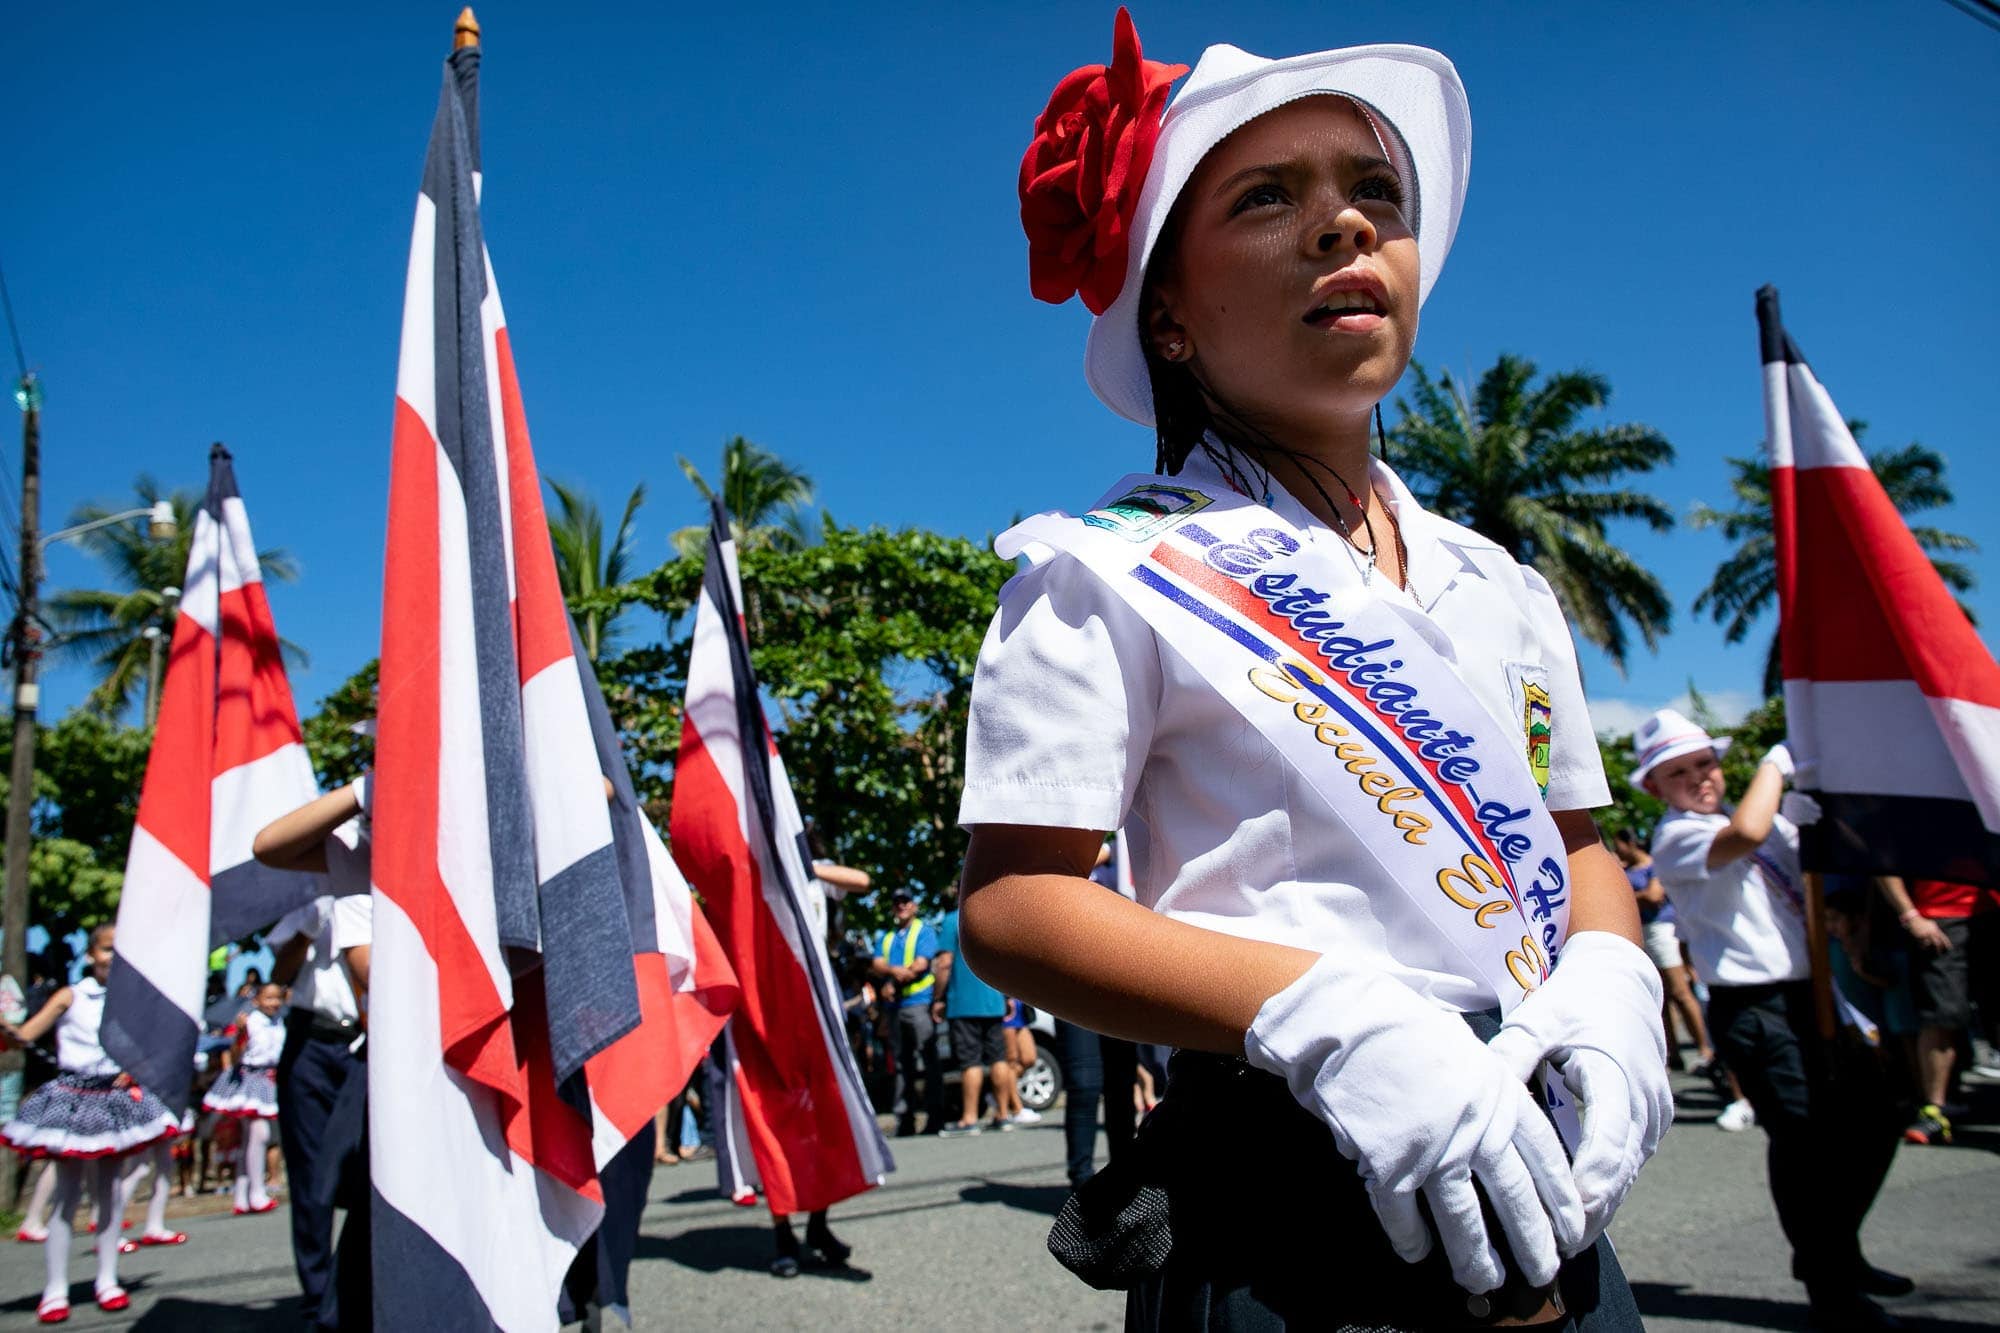 Marching with flags in the parade for Independence Day in Costa Rica